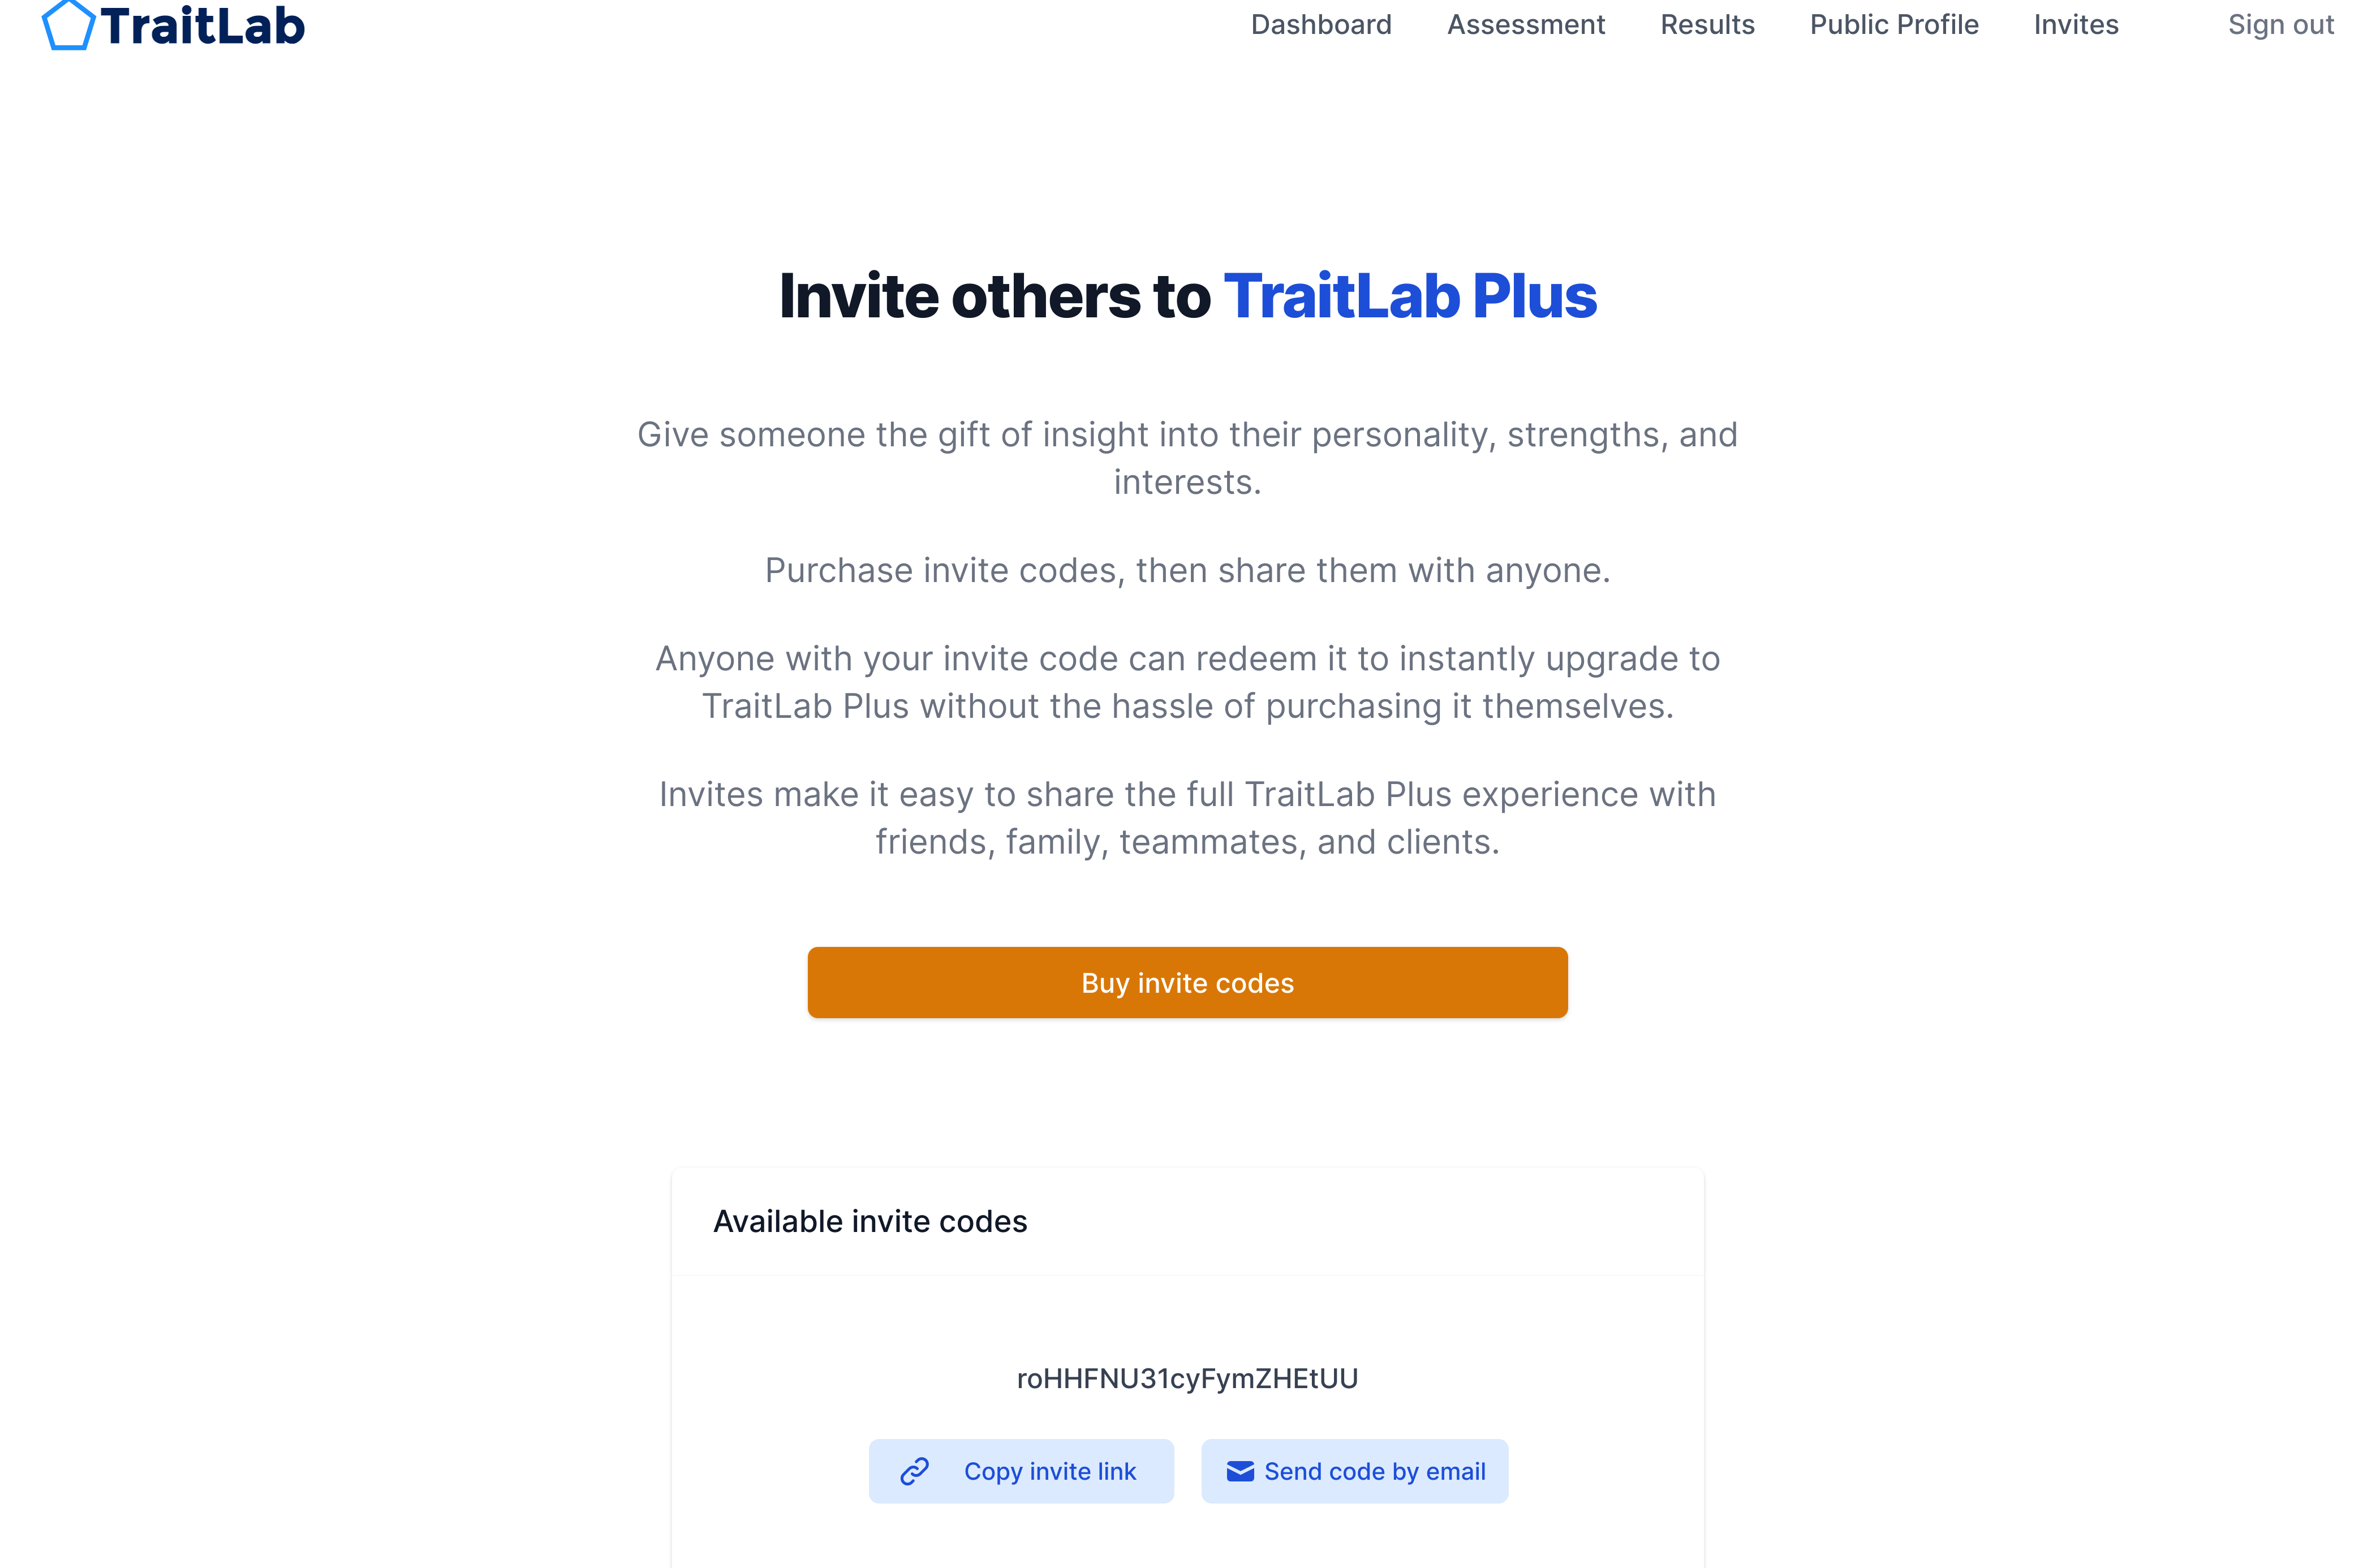 The invites system in TraitLab